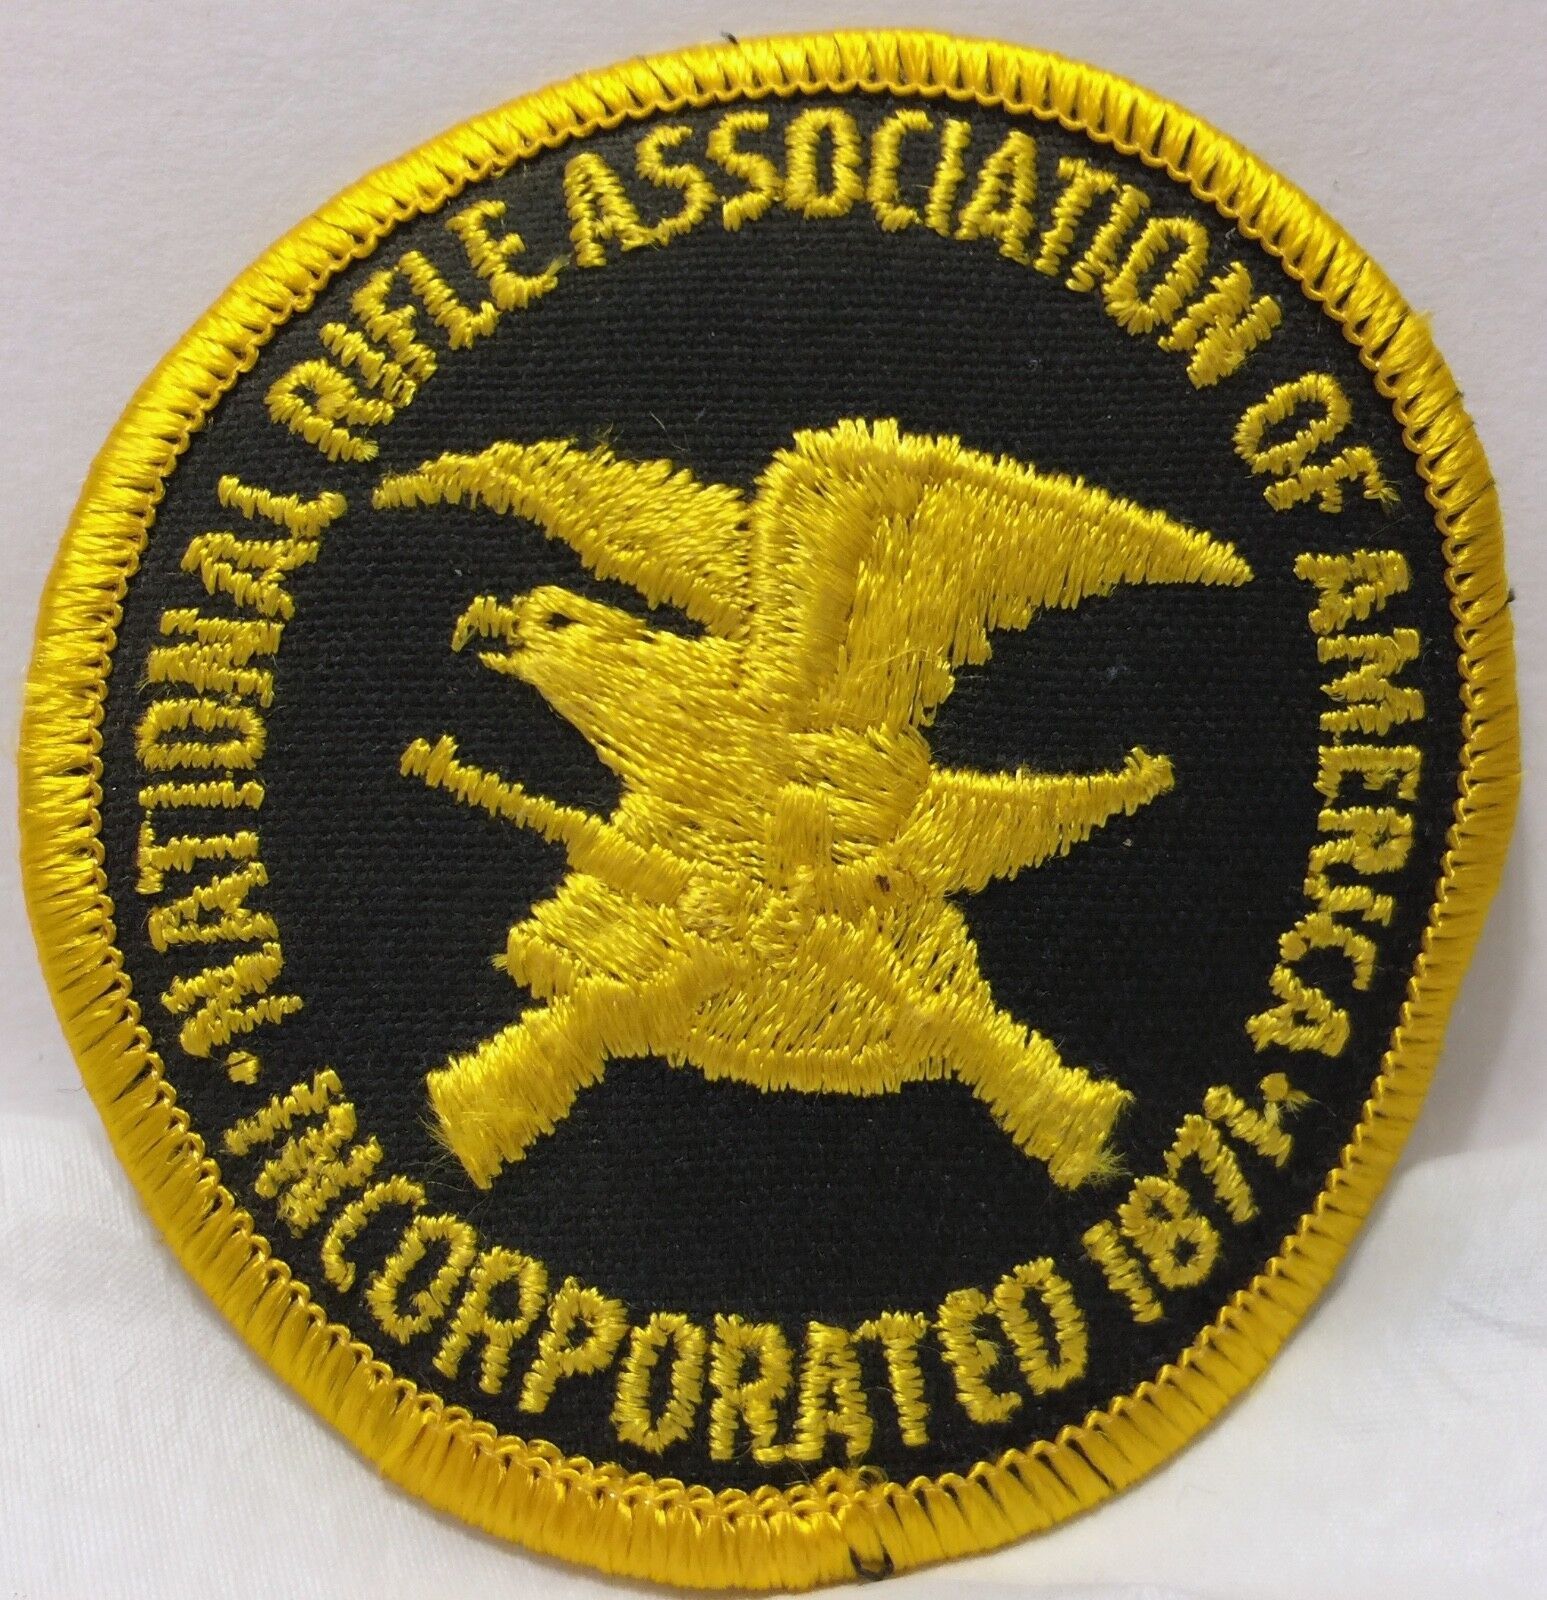 Primary image for National Rifle Association of America Patch Incorporated 1871 NRA 2nd Guns Bear